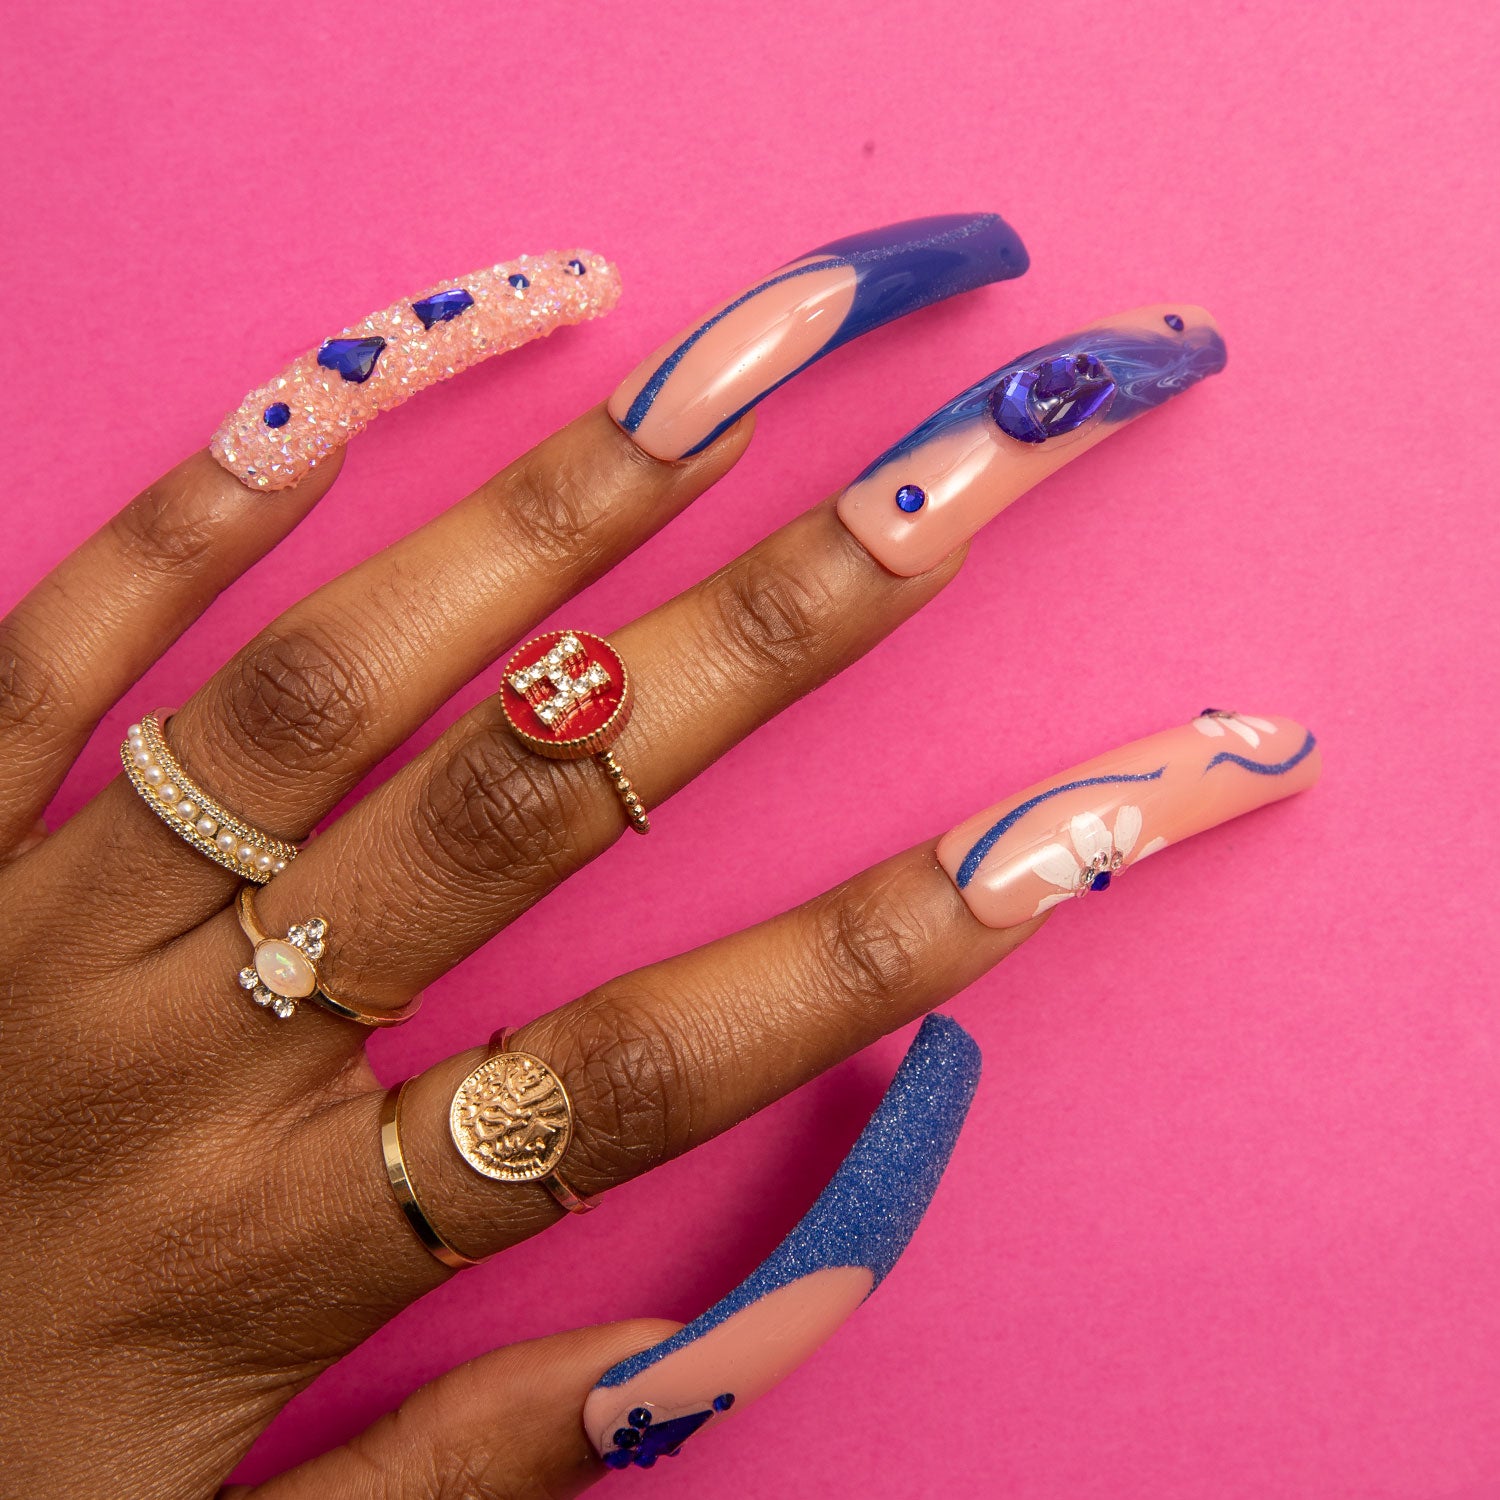 Close-up of hand with 'Blue Suede' press-on nails featuring blue French tips, curvy line designs, crystal-like decorations, and blue heart-shaped gems; hand is adorned with various stylish rings, against a pink background.